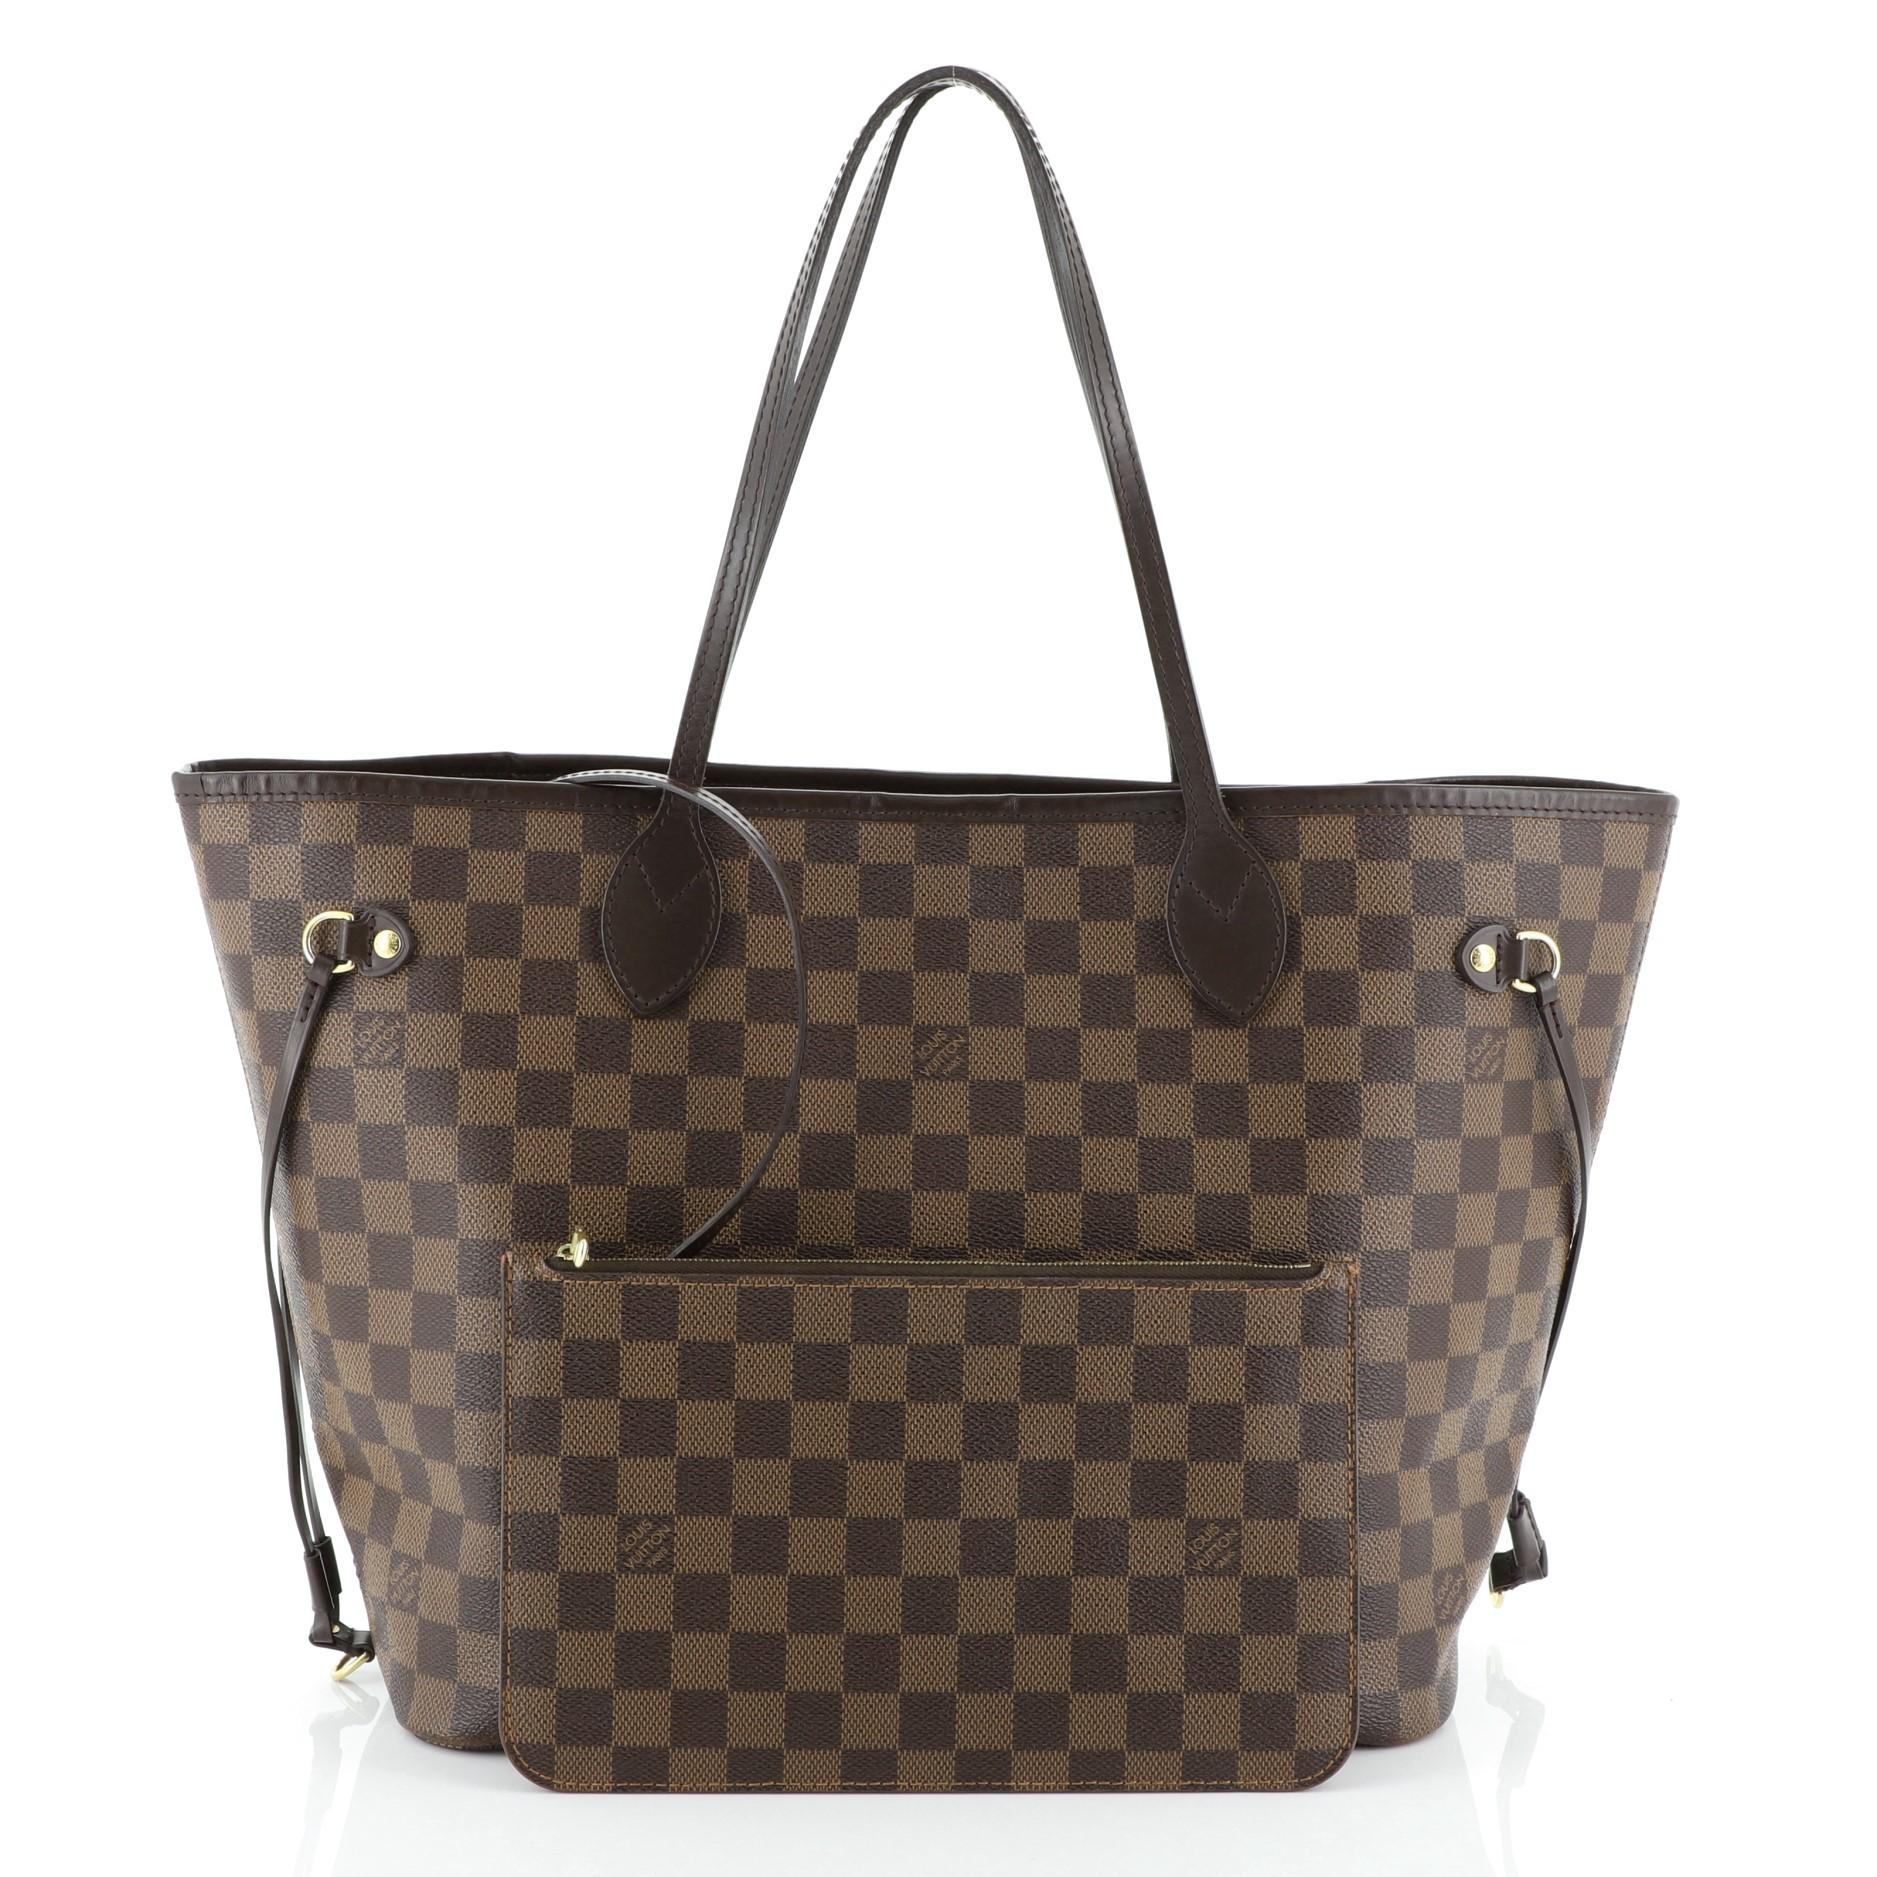 This Louis Vuitton Neverfull NM Tote Damier MM, crafted in damier ebene coated canvas, features dual slim leather handles, side laces and gold-tone hardware. Its wide open top showcases a red fabric interior with side zip pocket. Authenticity code